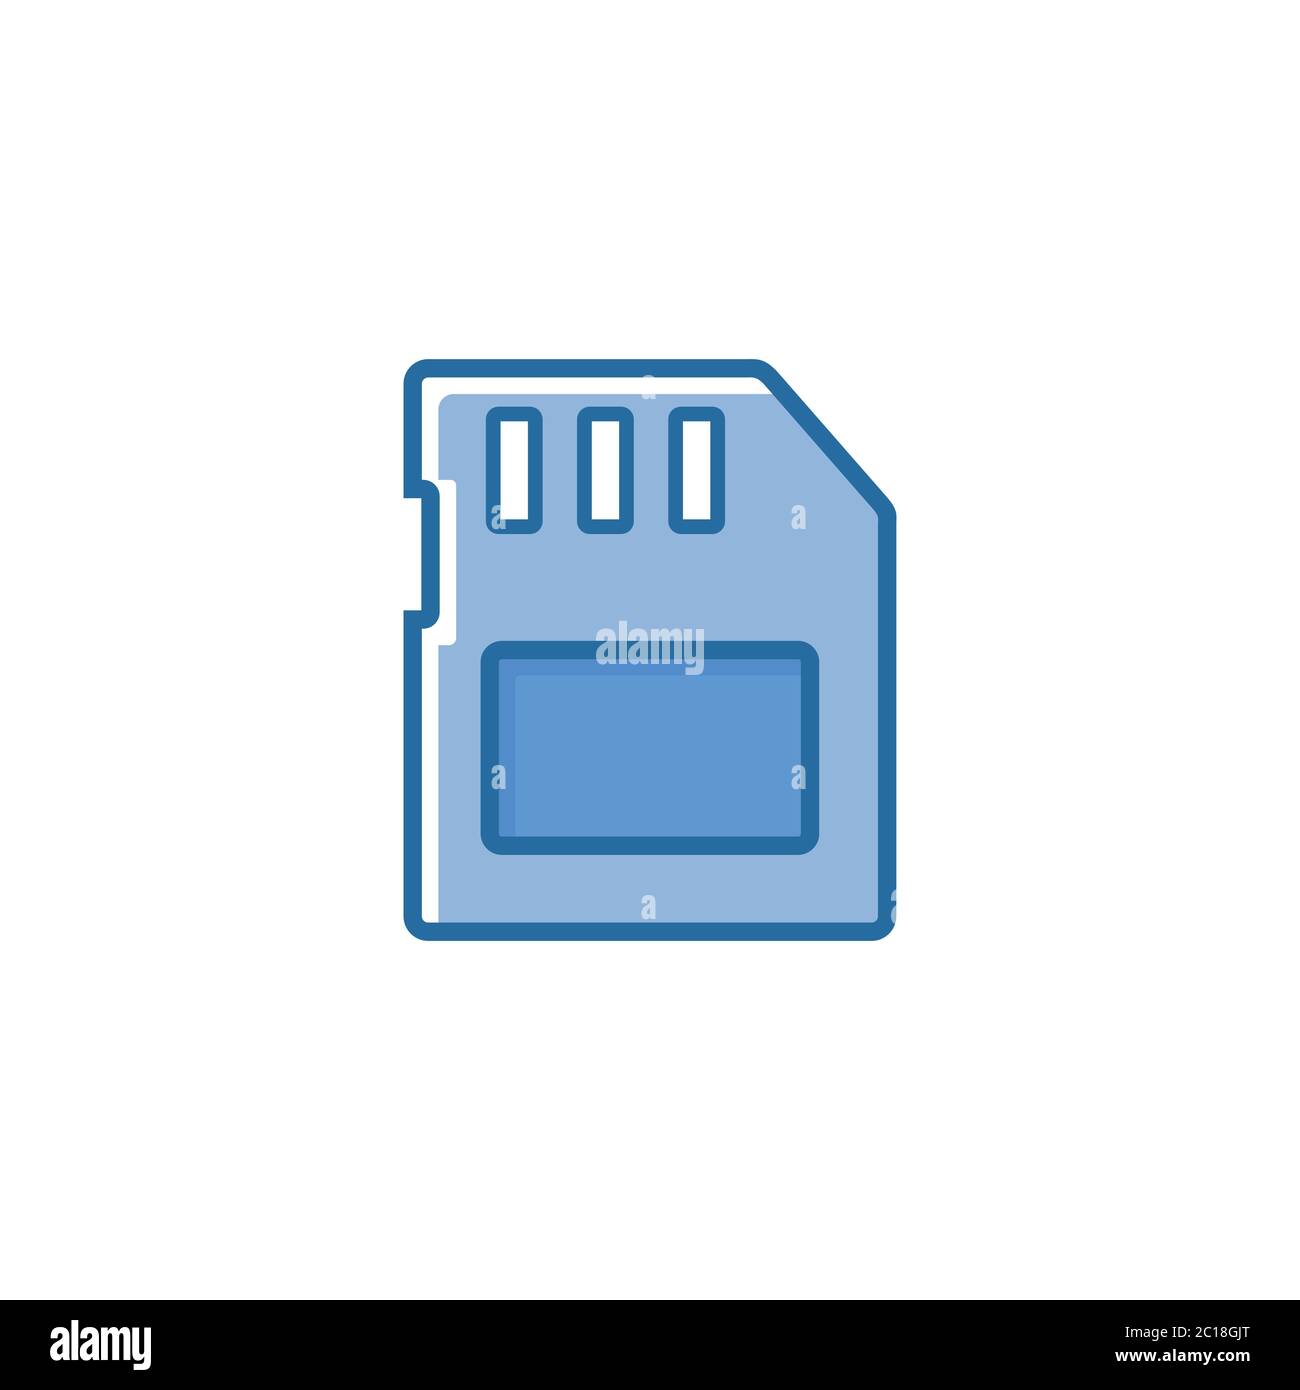 Simple Flat minimalist micro sd card icon. Suitable for design element of storage device technology. Stock Vector